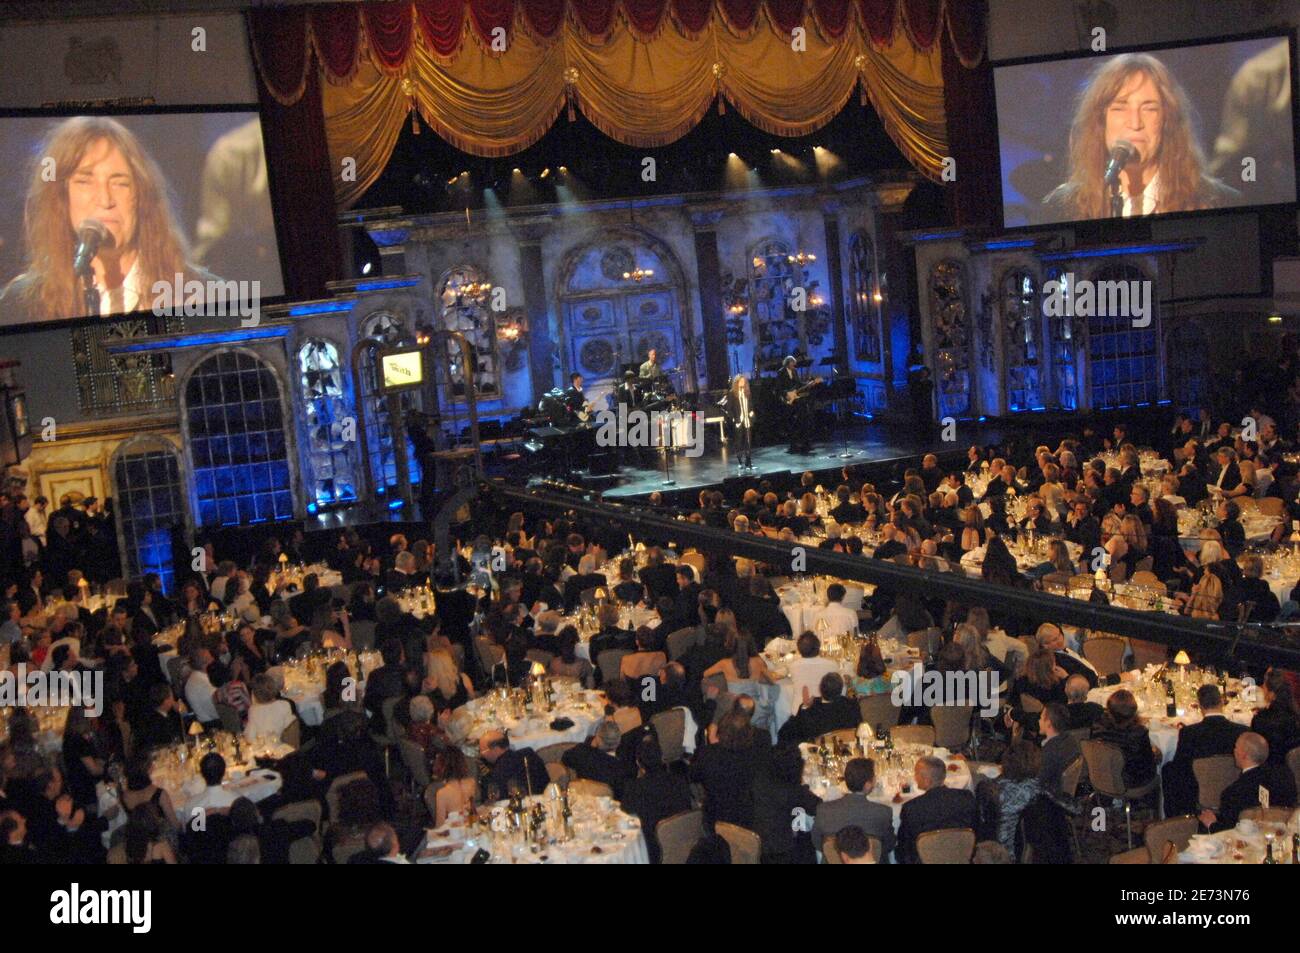 Inductee Patti Smith performs on stage at the 22nd annual Rock And Roll Hall of Fame Induction Ceremony held at the Waldorf Astoria Hotel in New York City, NY, USA on March 12, 2007. Photo by Gregorio Binuya/ABACAPRESS.COM Stock Photo